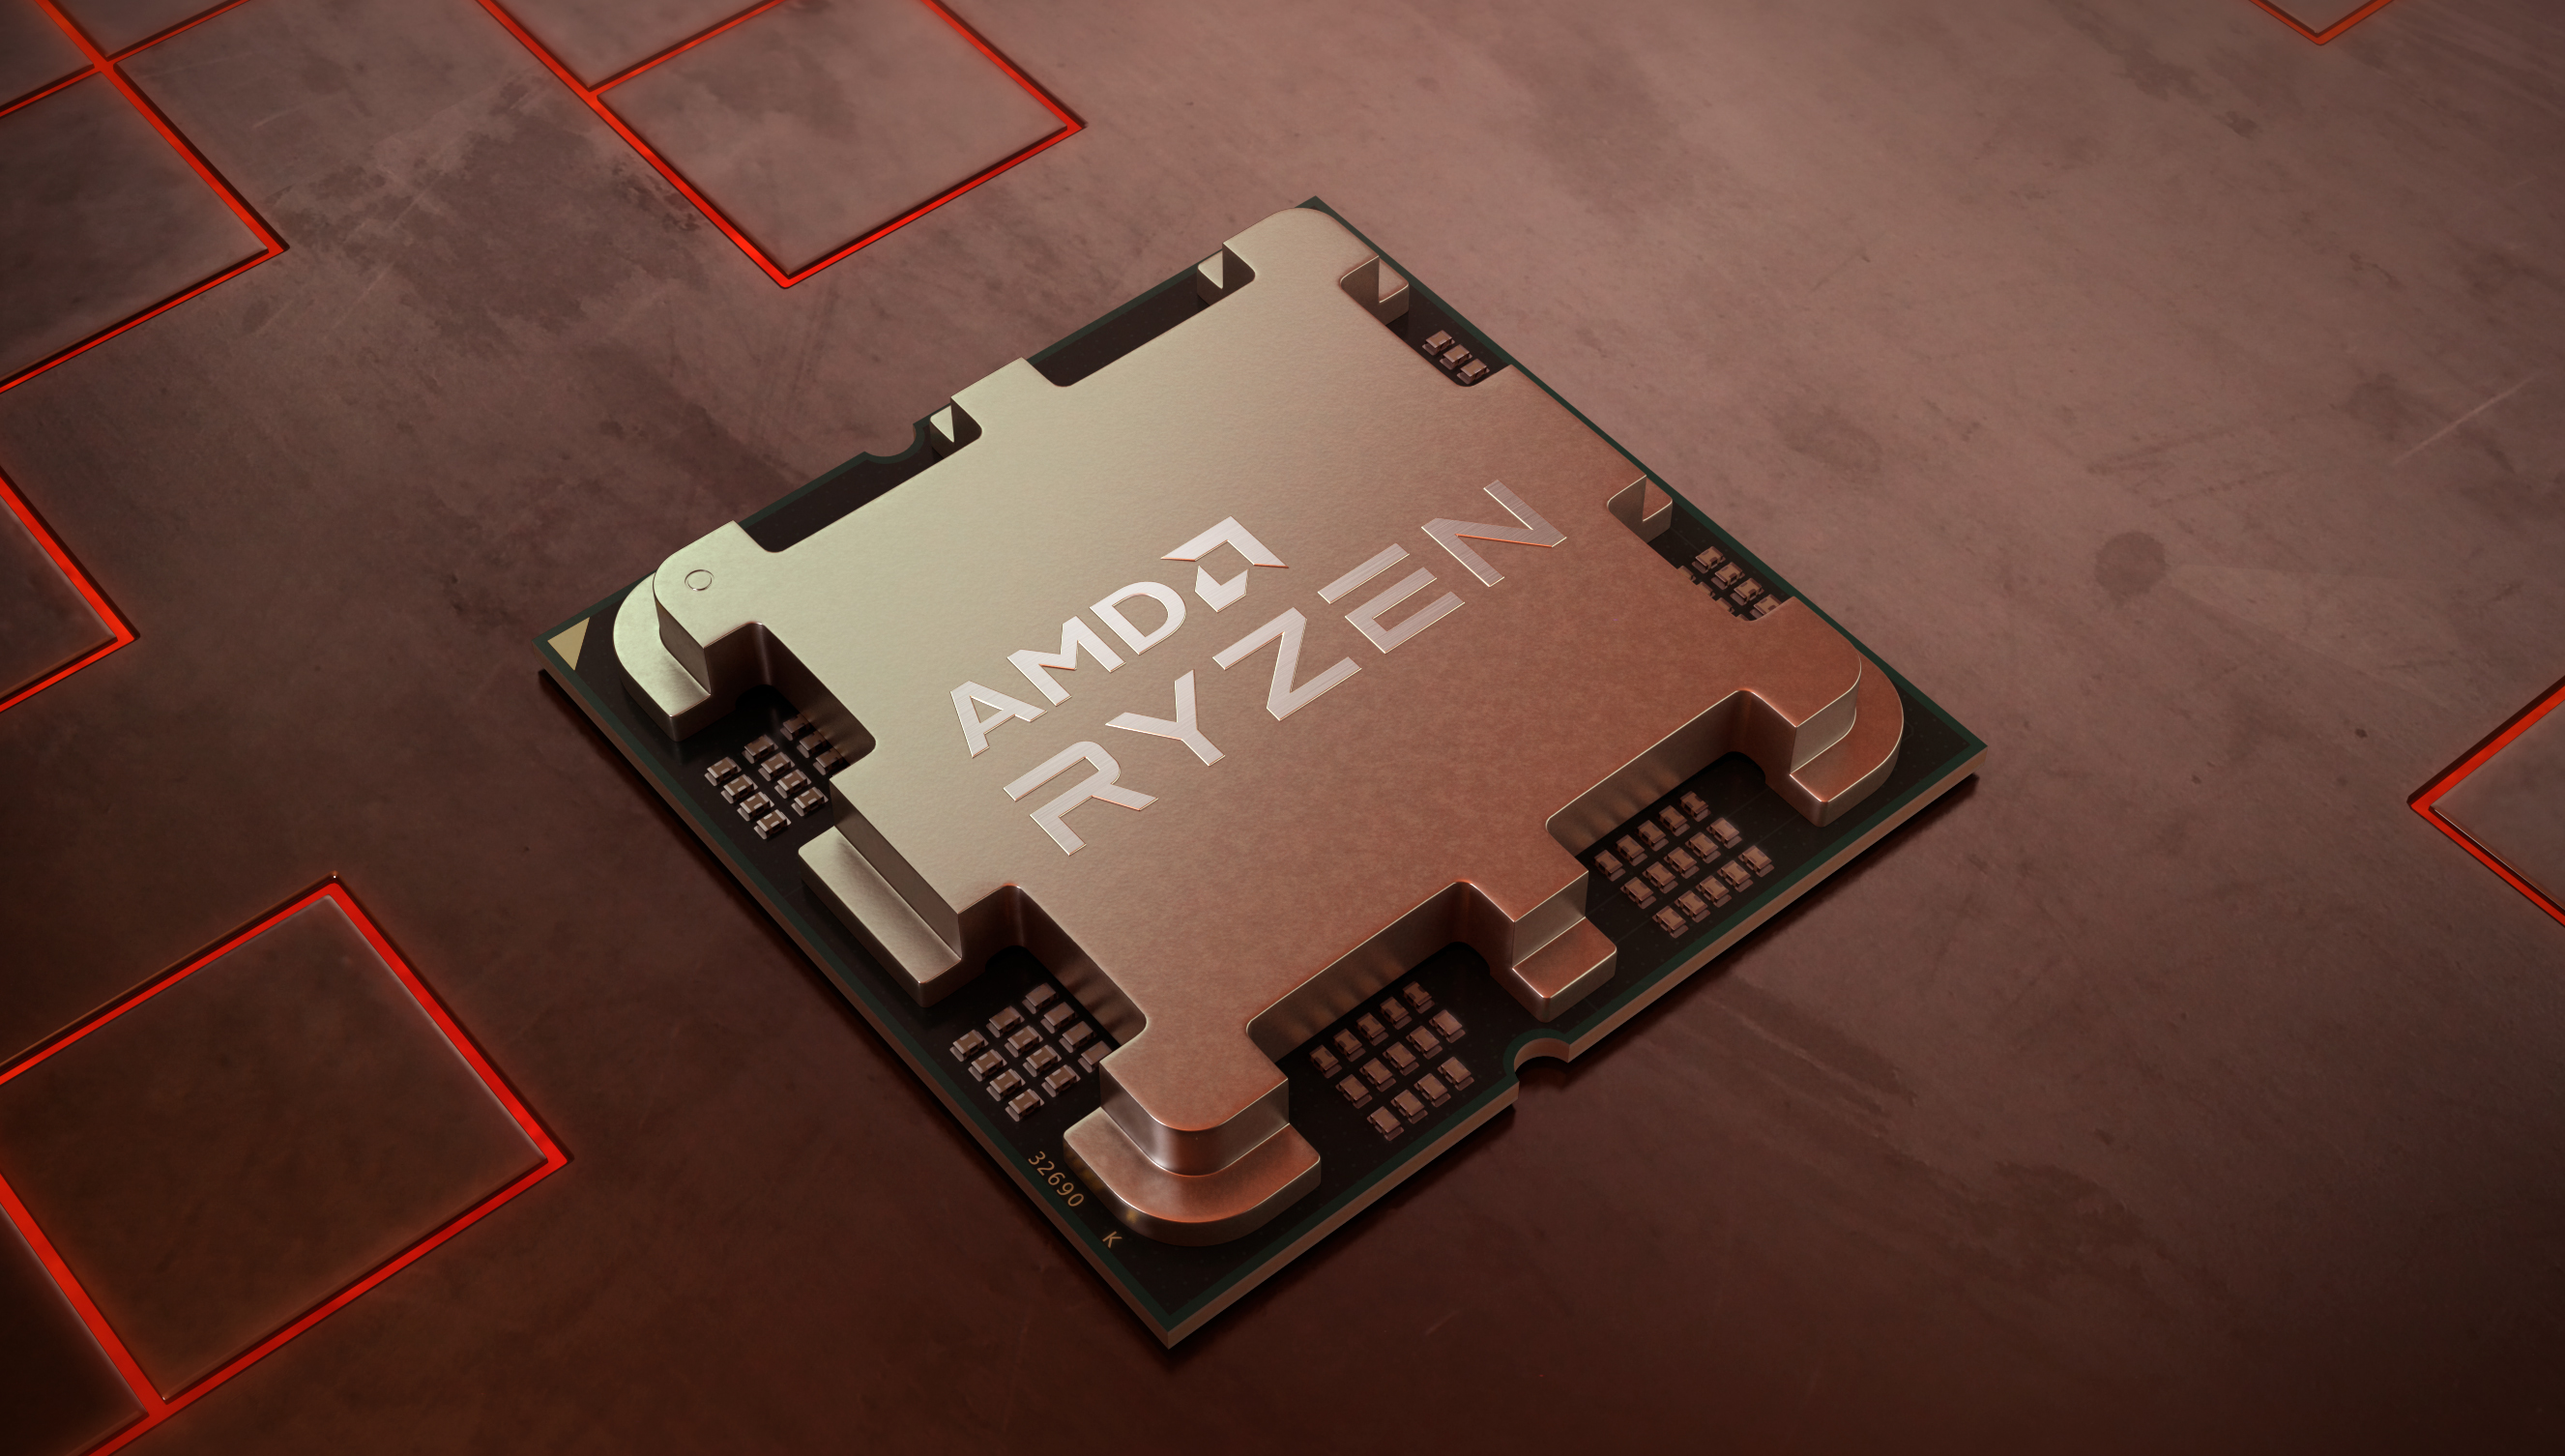 AMD Ryzen 5 7600X engineering sample shows up on a Chinese black